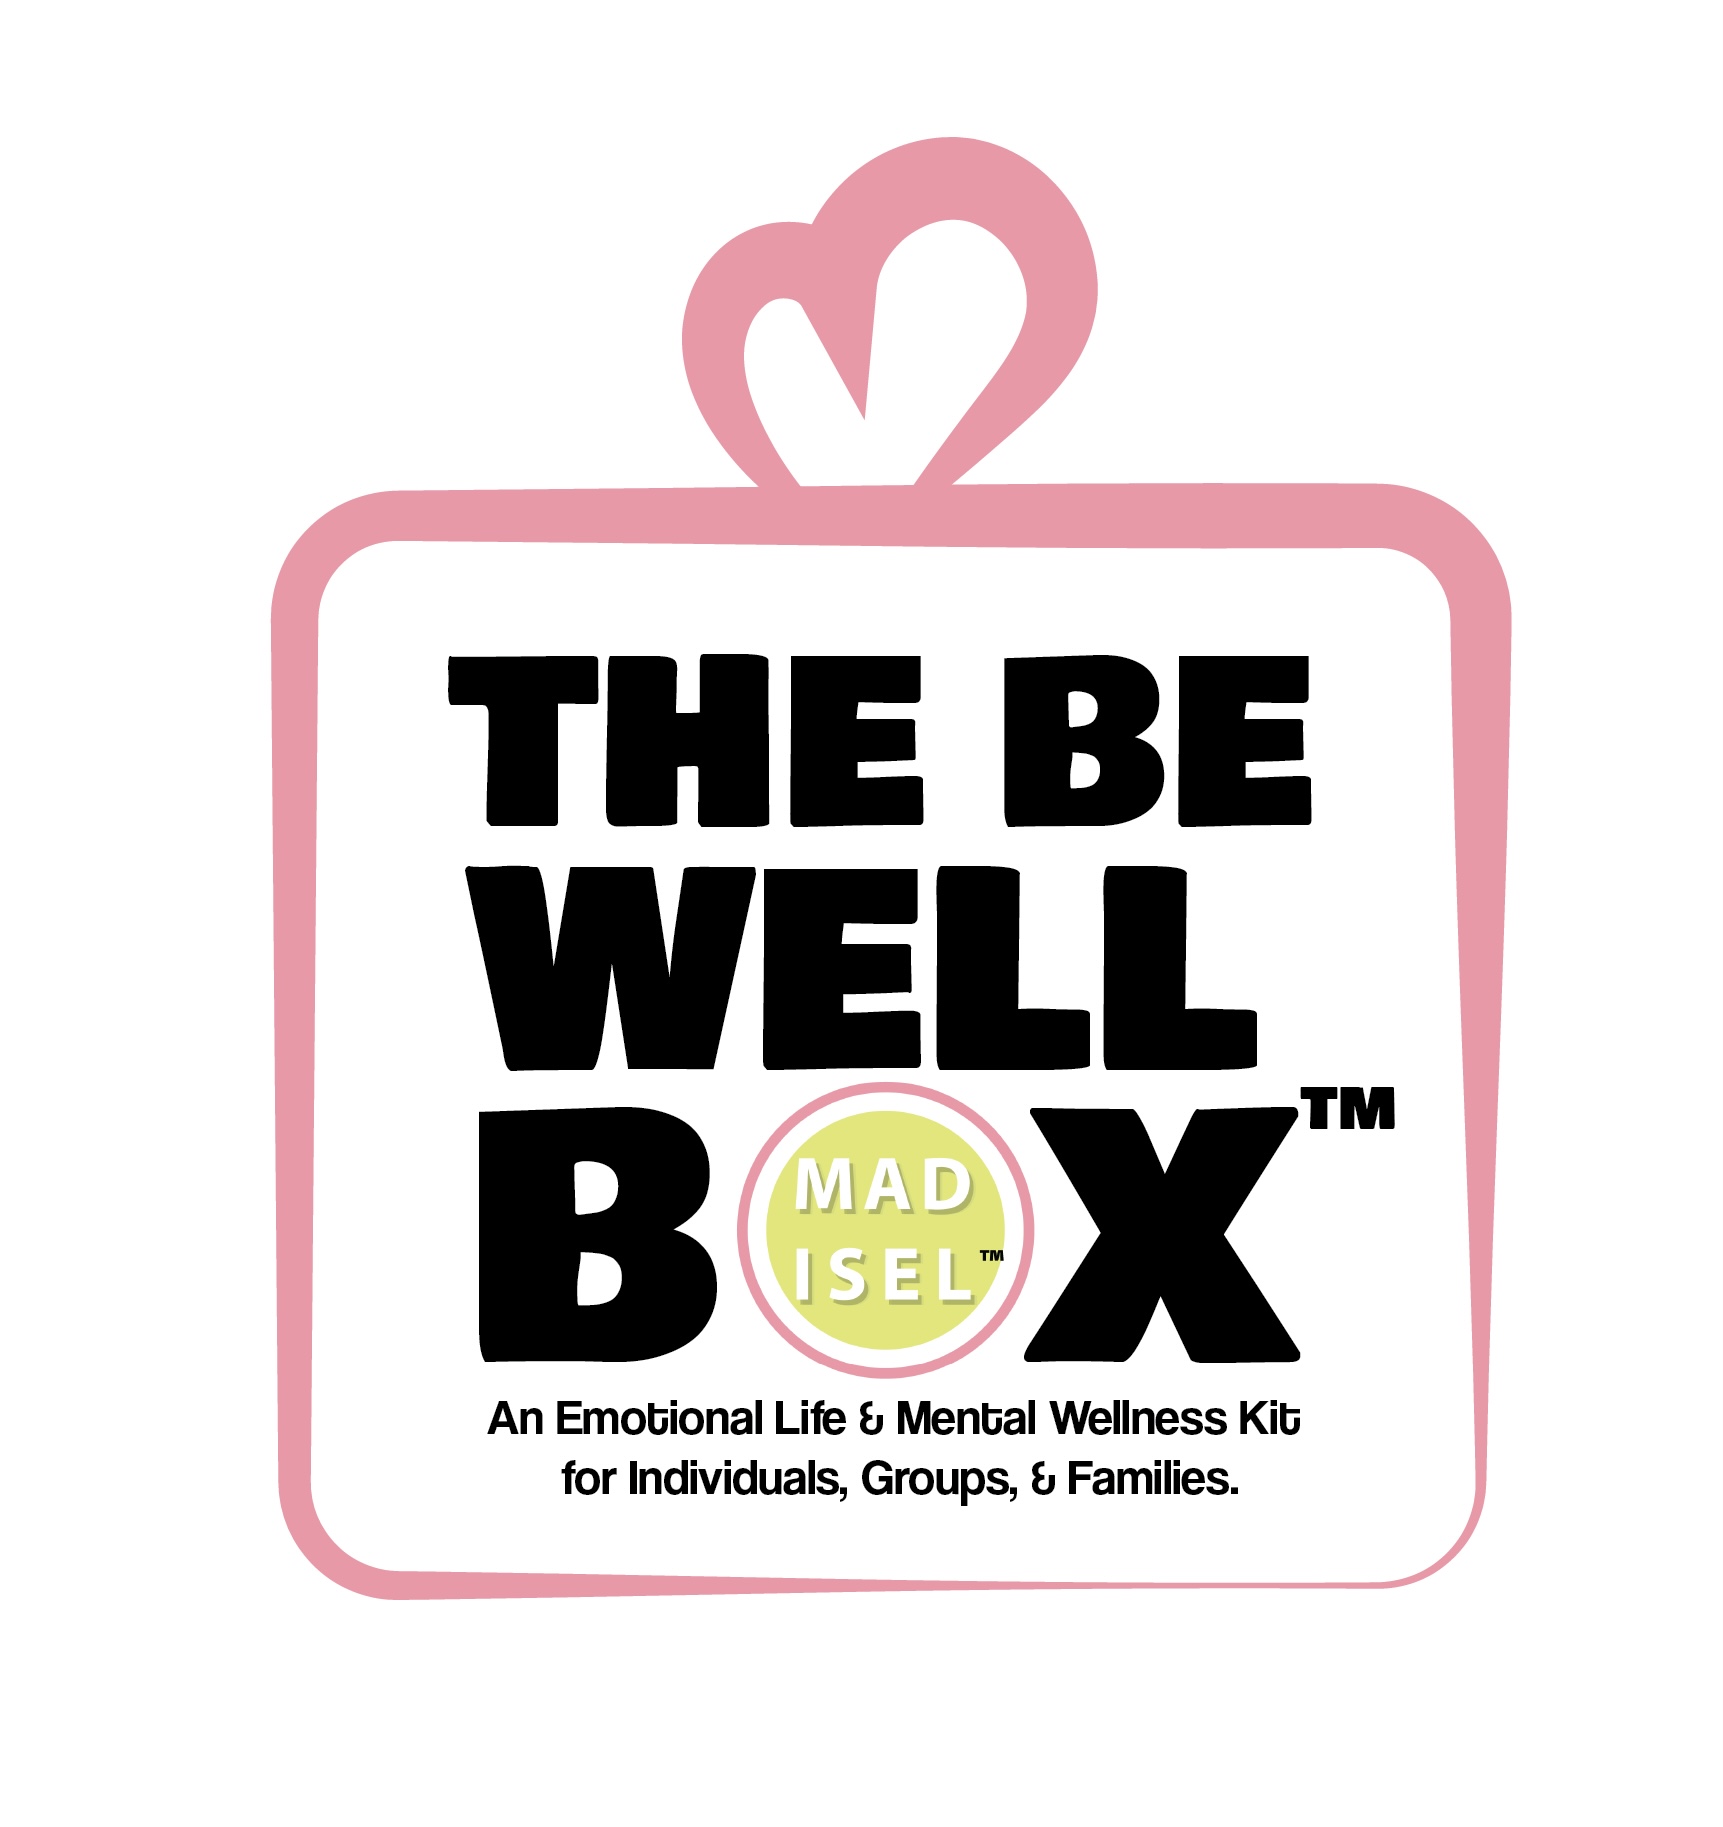 the be well box